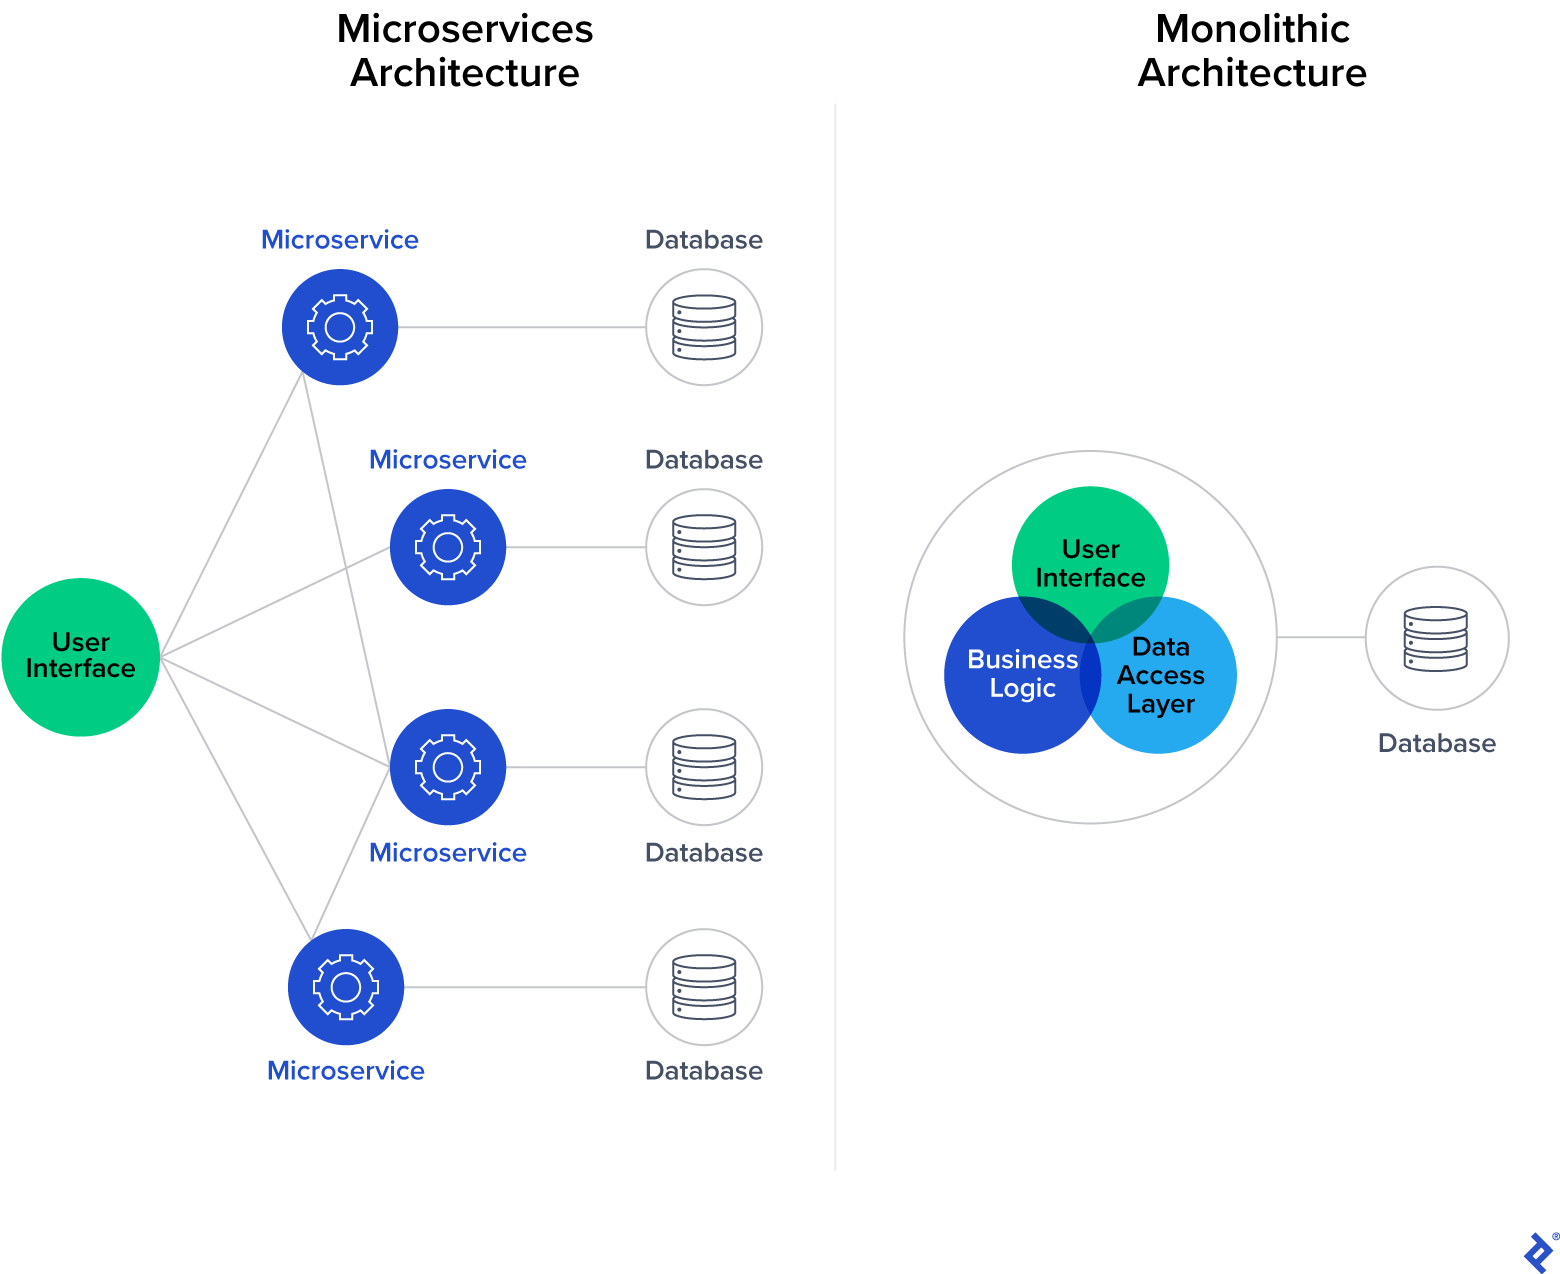 Microservices architecture (with UI individually connected to separate microservices) versus monolithic architecture (with logic and UI connected).